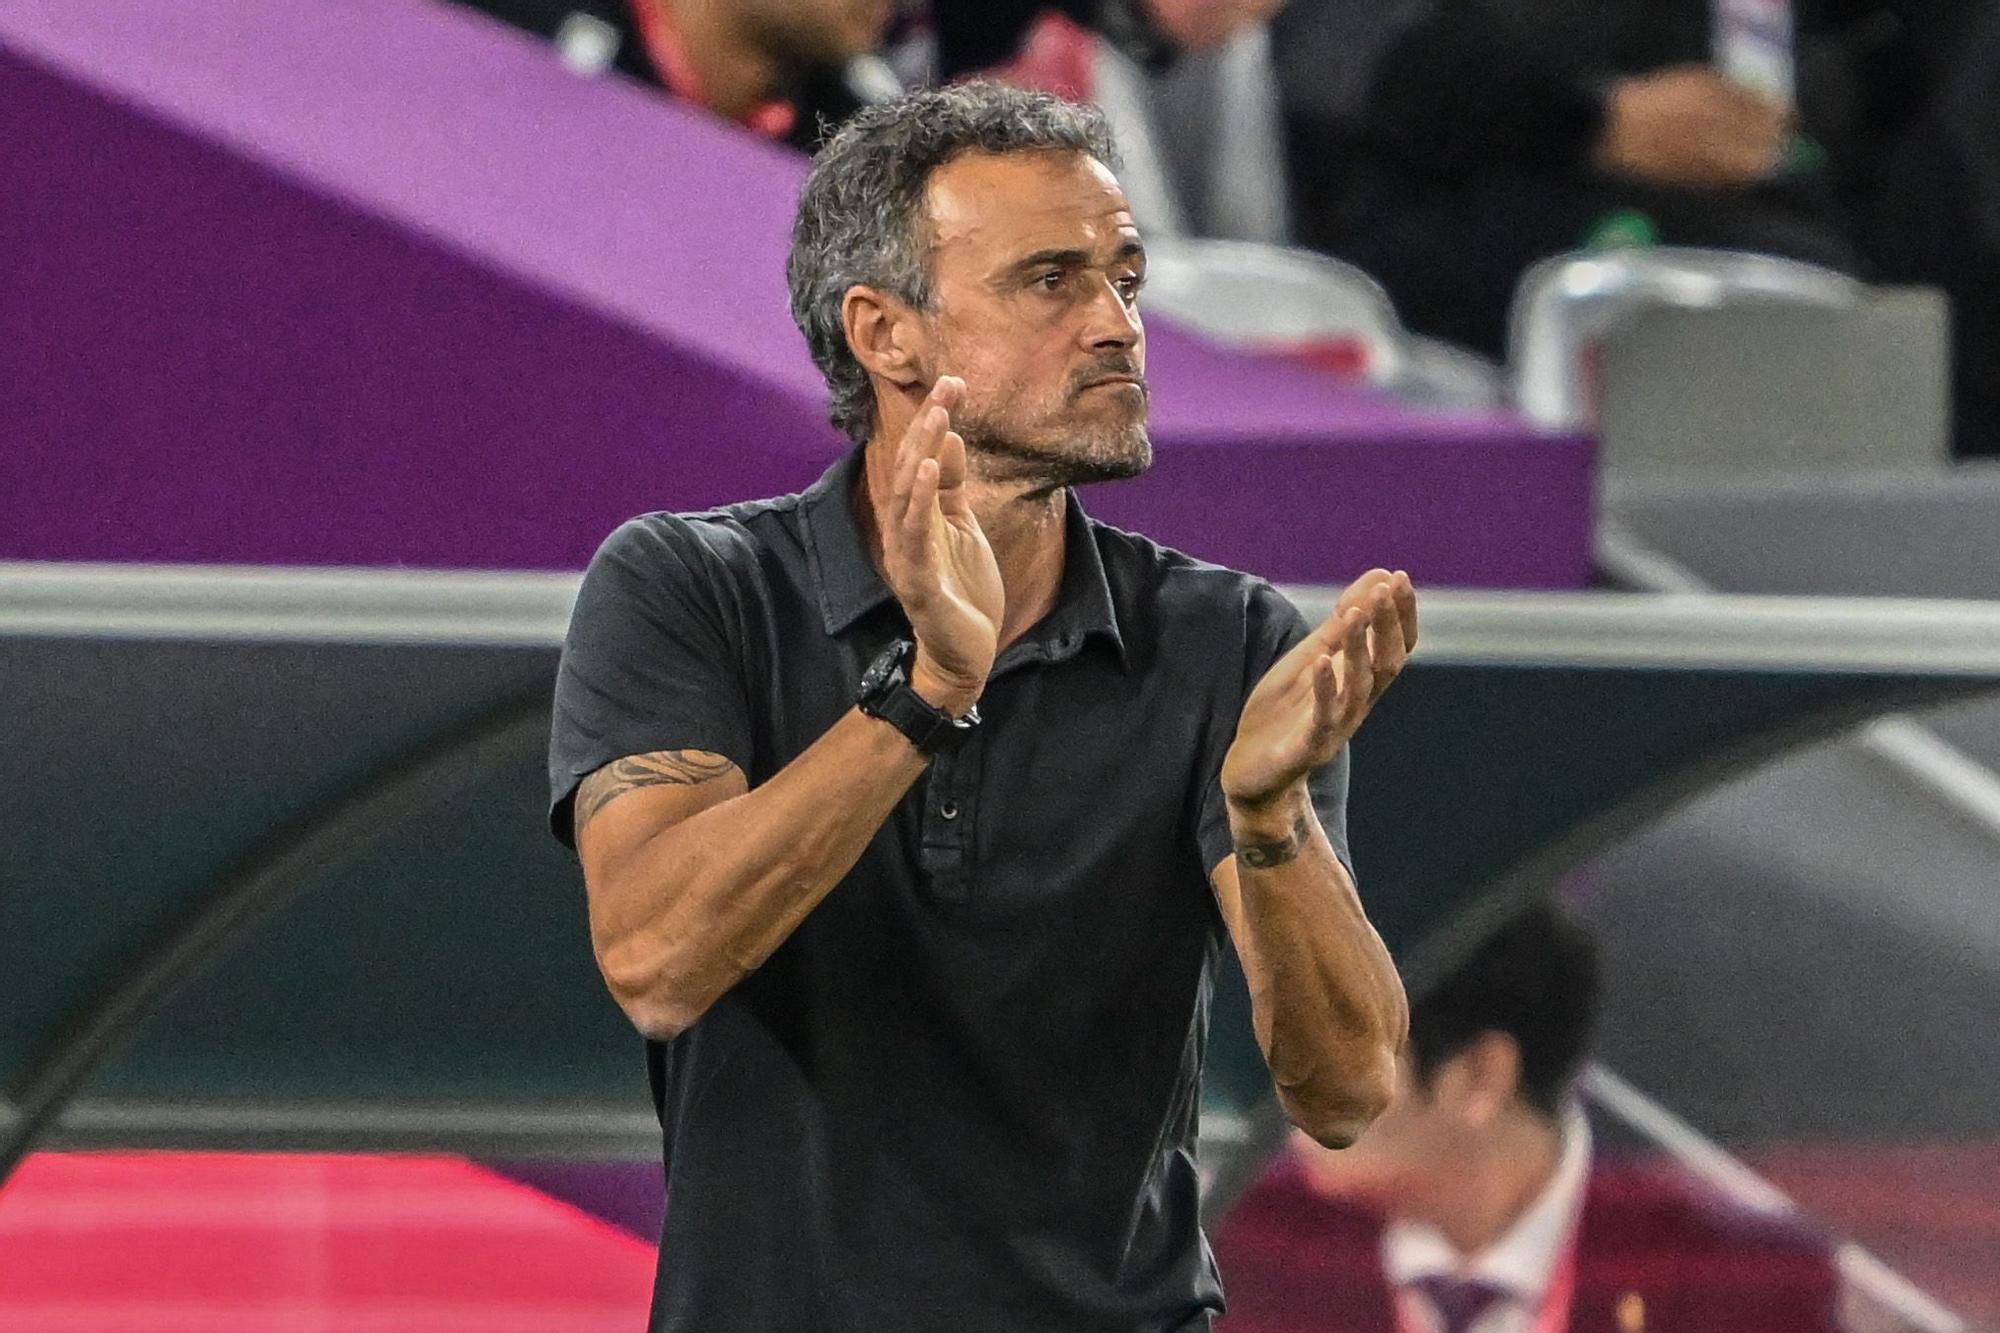 06 December 2022, Qatar, Al-Rayyan: Spain coach Luis Enrique applauds during the FIFA World Cup Qatar 2022 Round of 16 soccer match between Morocco and Spain at the Education City Stadium. Photo: Robert Michael/dpa